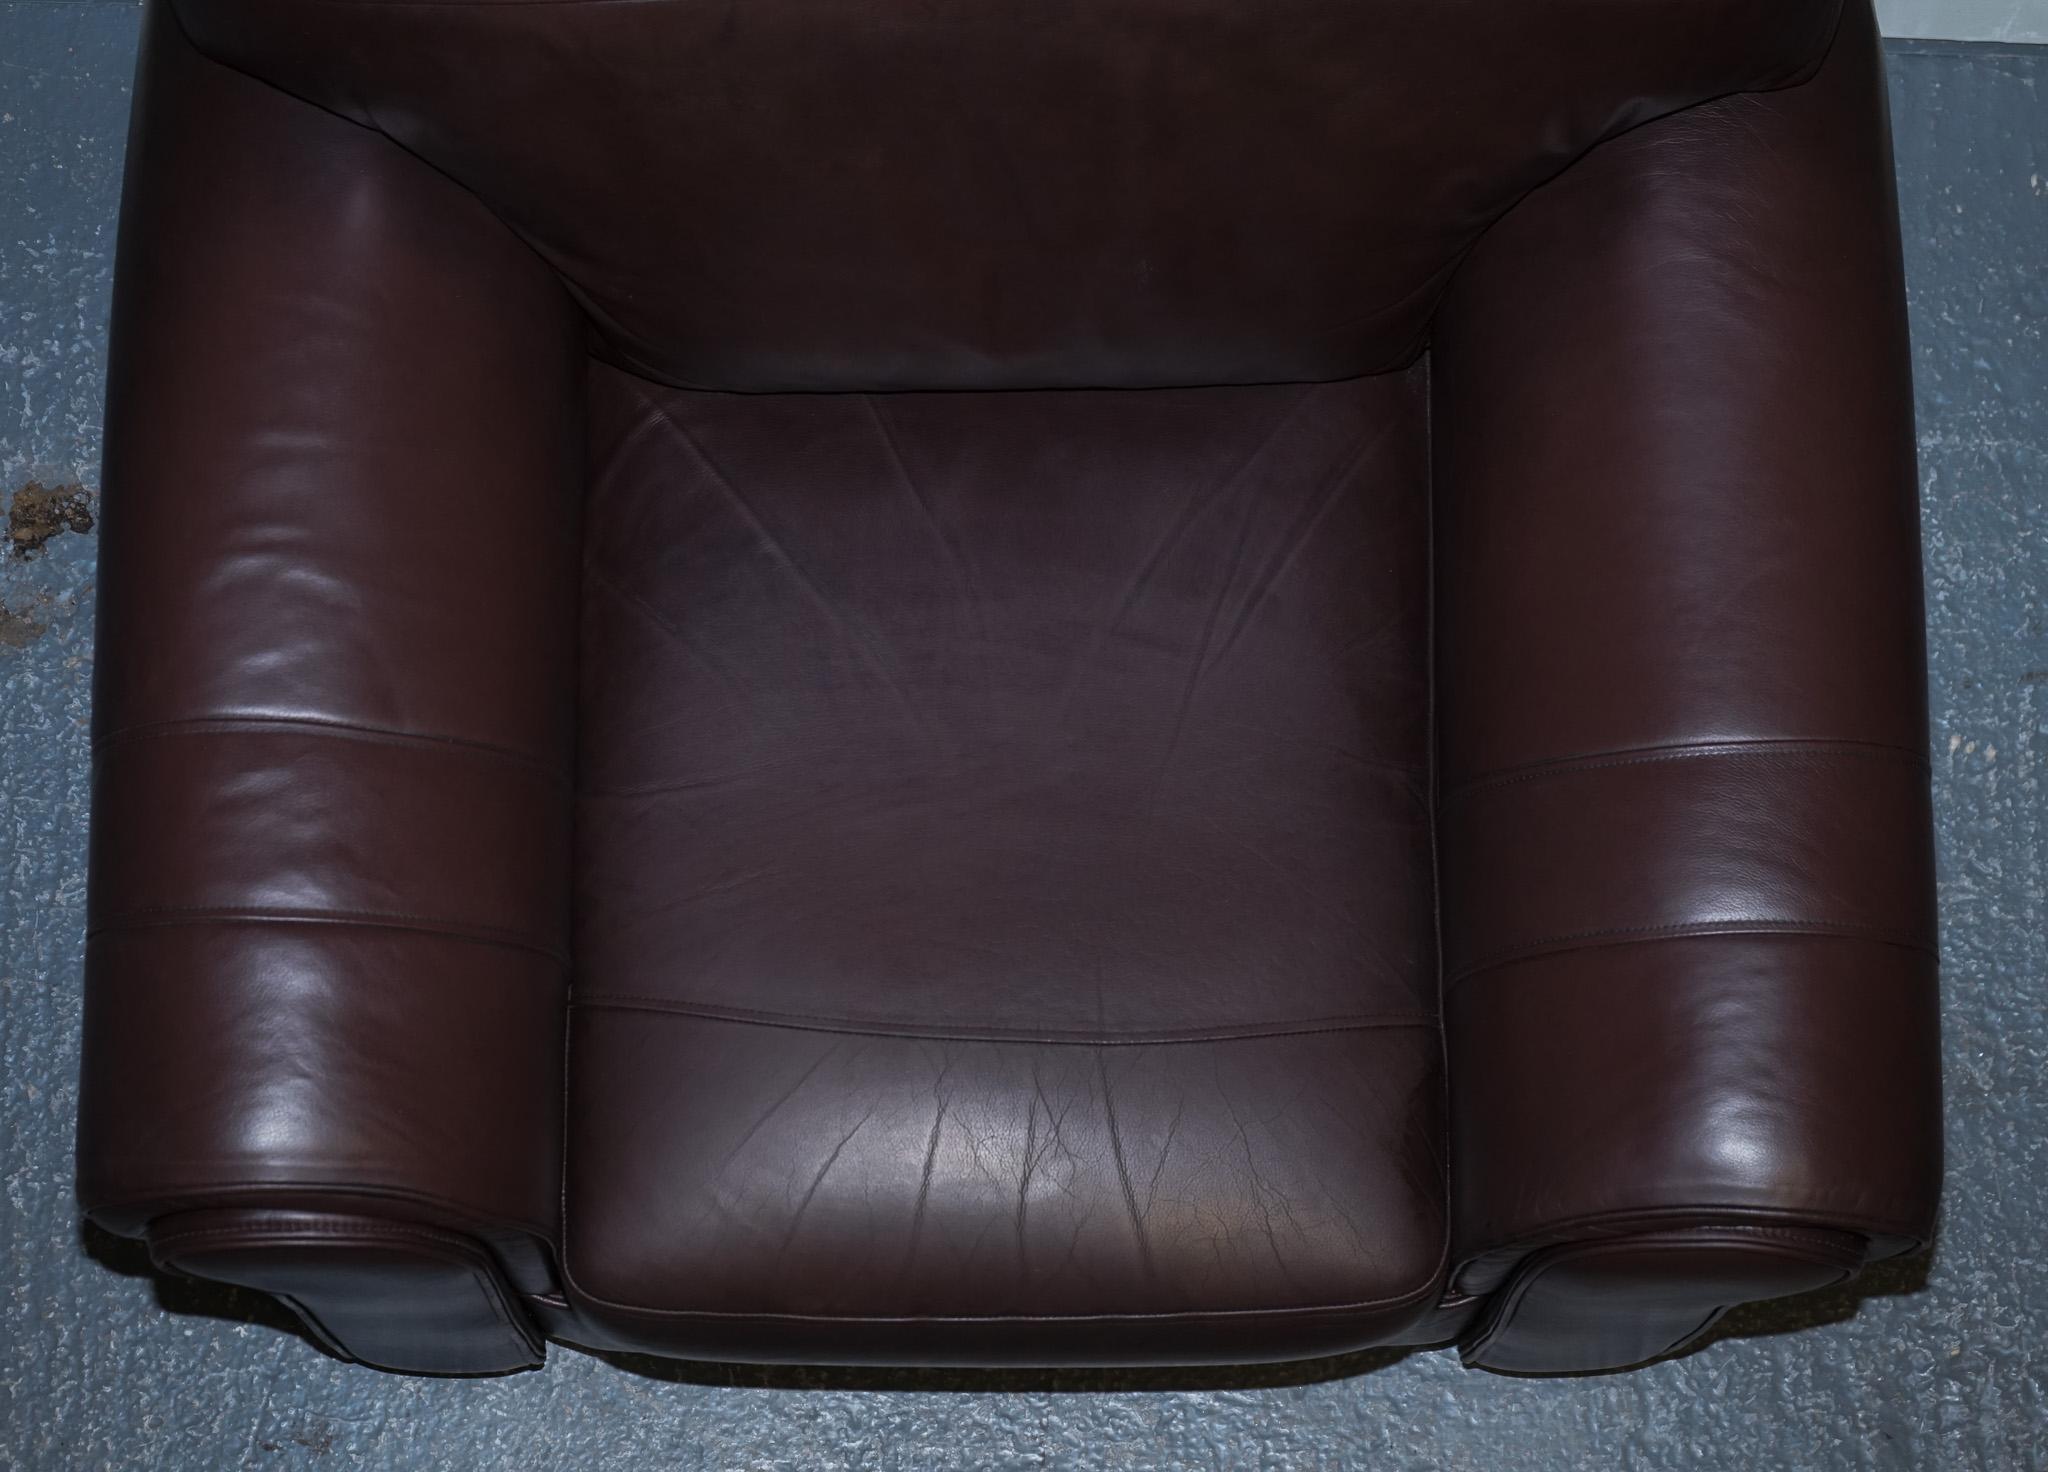 PAIR OF LARGE COMFORTABLE BROWN LEATHER ARMCHAIRS, MATCHiNG SOFA AVAILABLE In Good Condition For Sale In Pulborough, GB